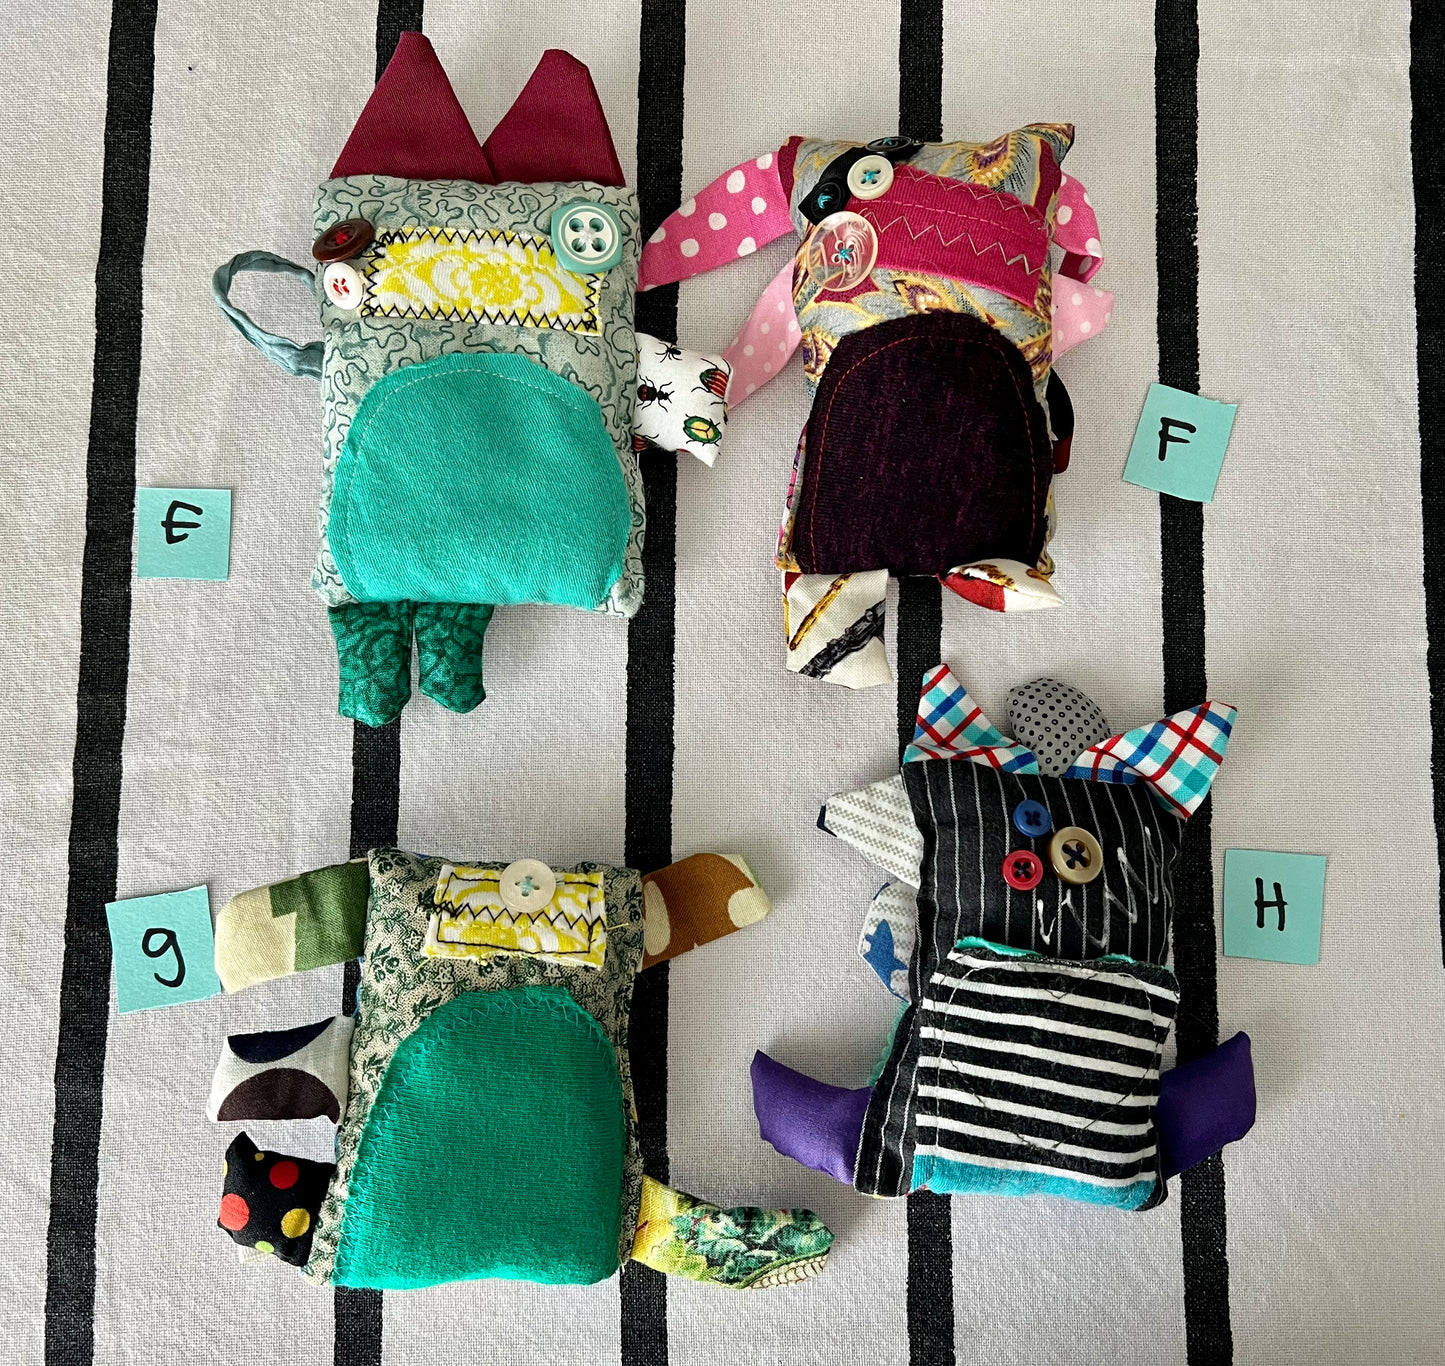 front view of mini monsters with letters E F G H next to each one.